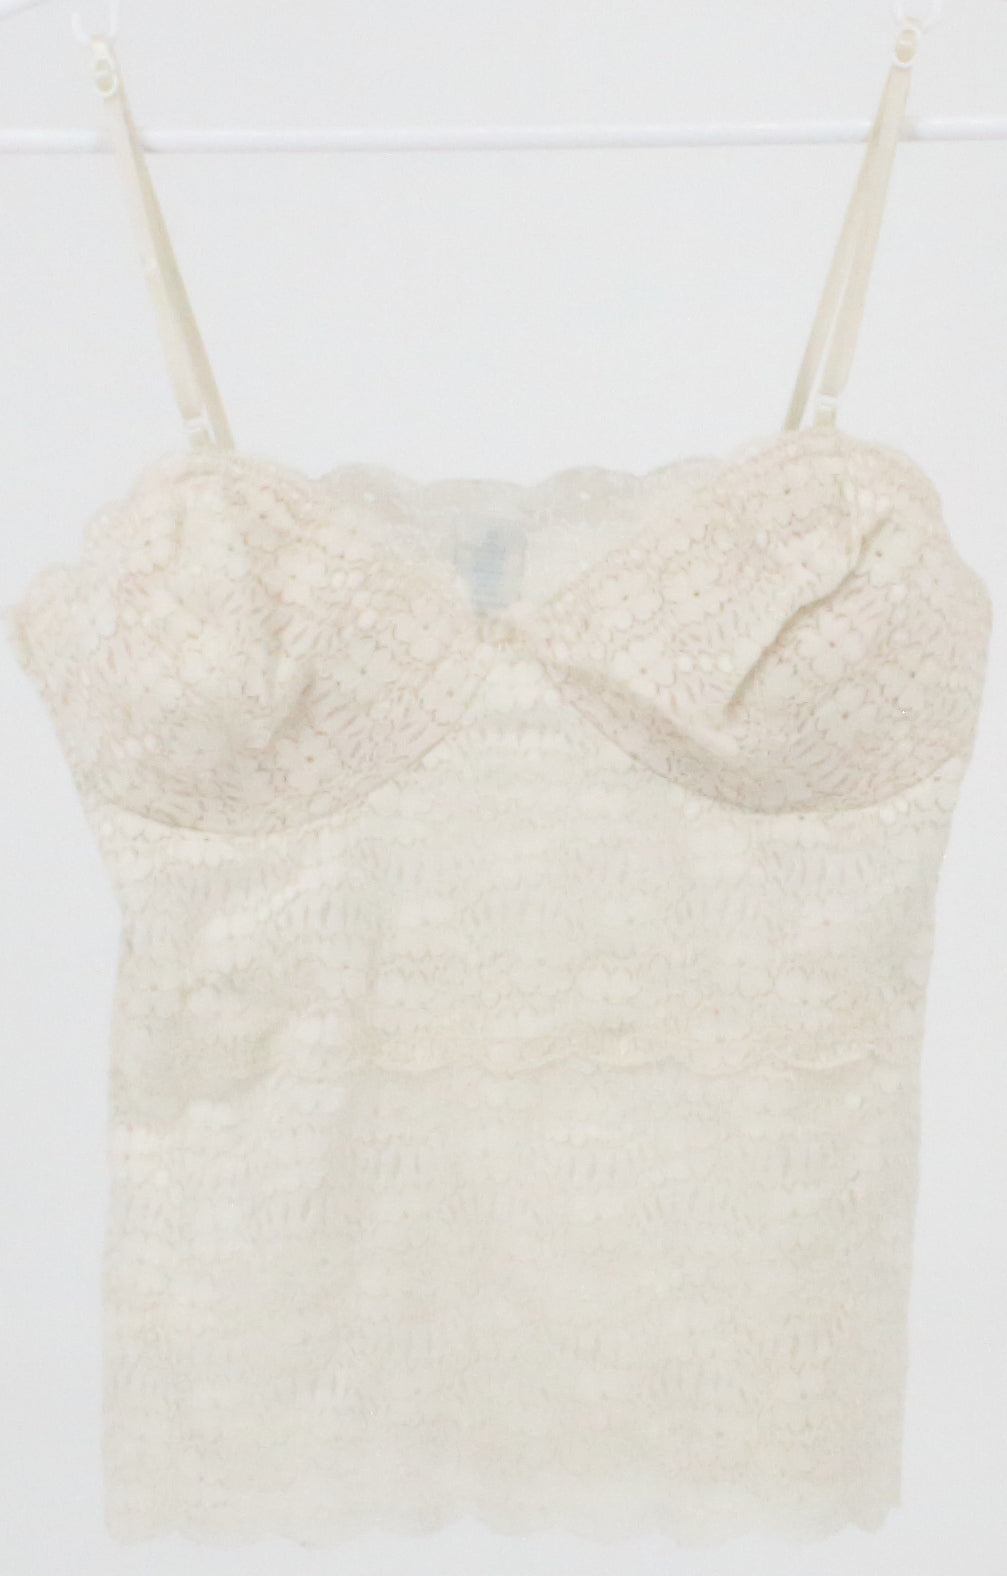 Off White Lingerie Lace Top